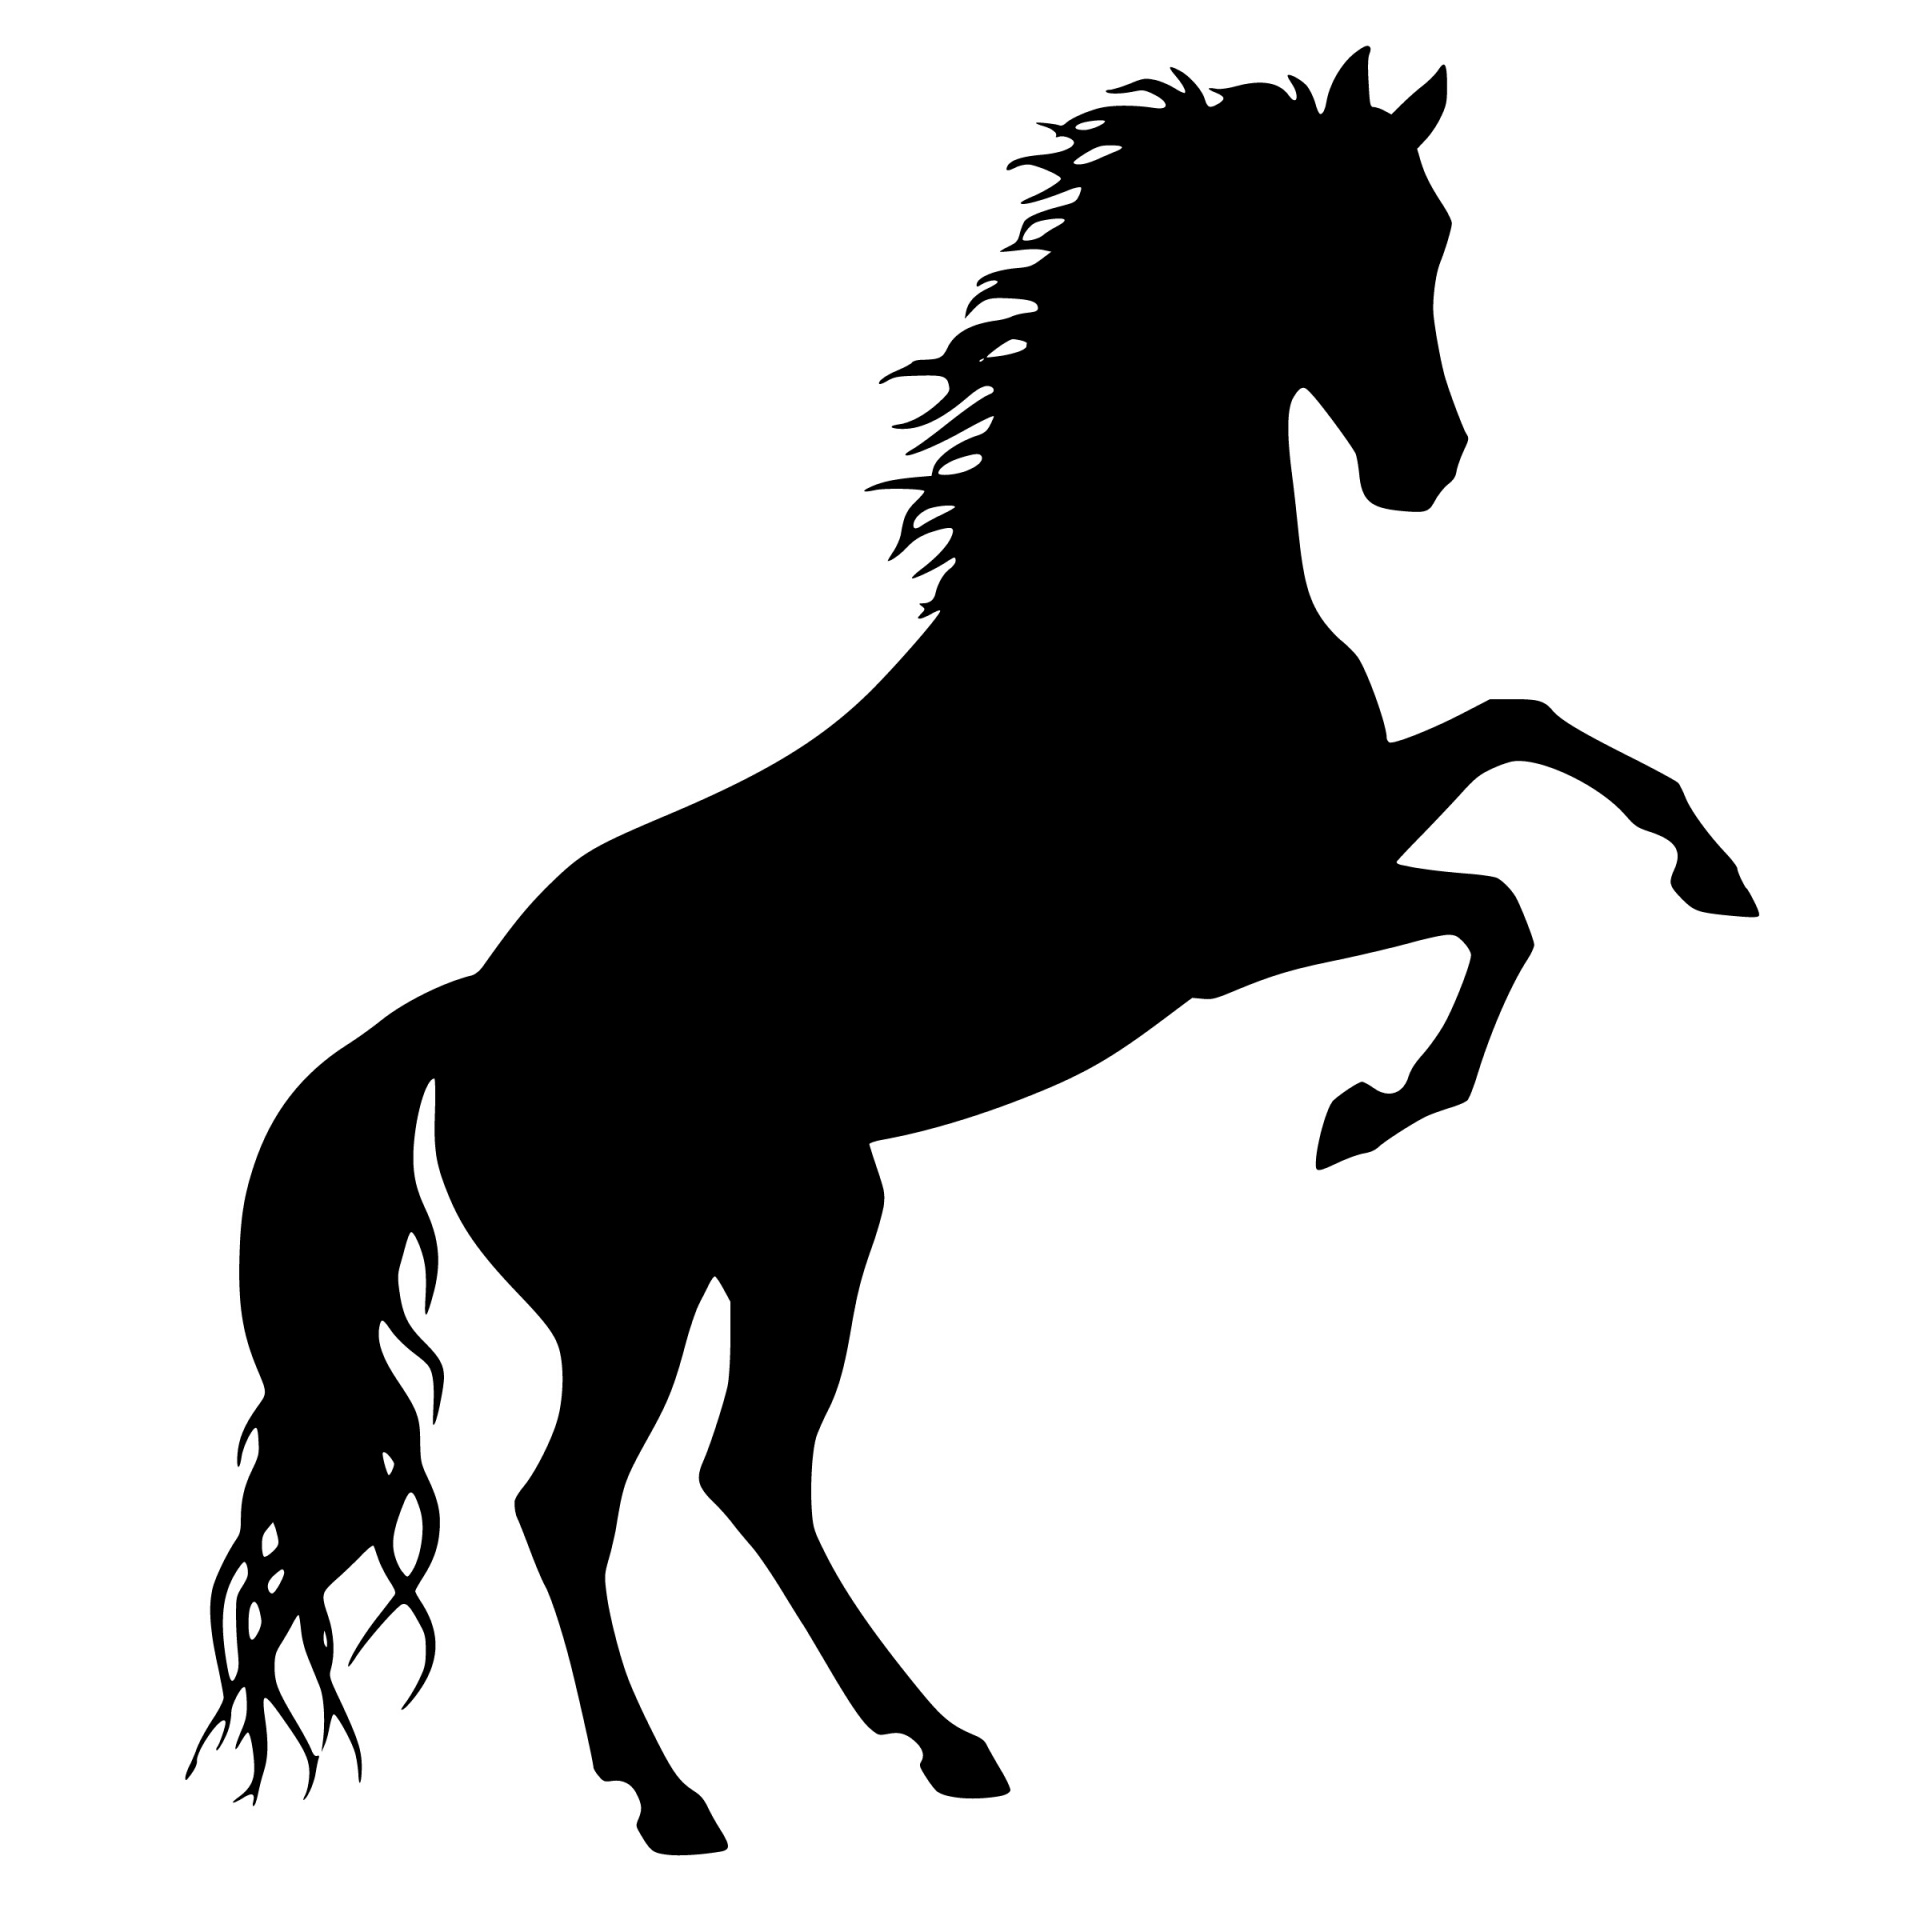 silhouette, horse, animal, equine, rearing, ride, transportation